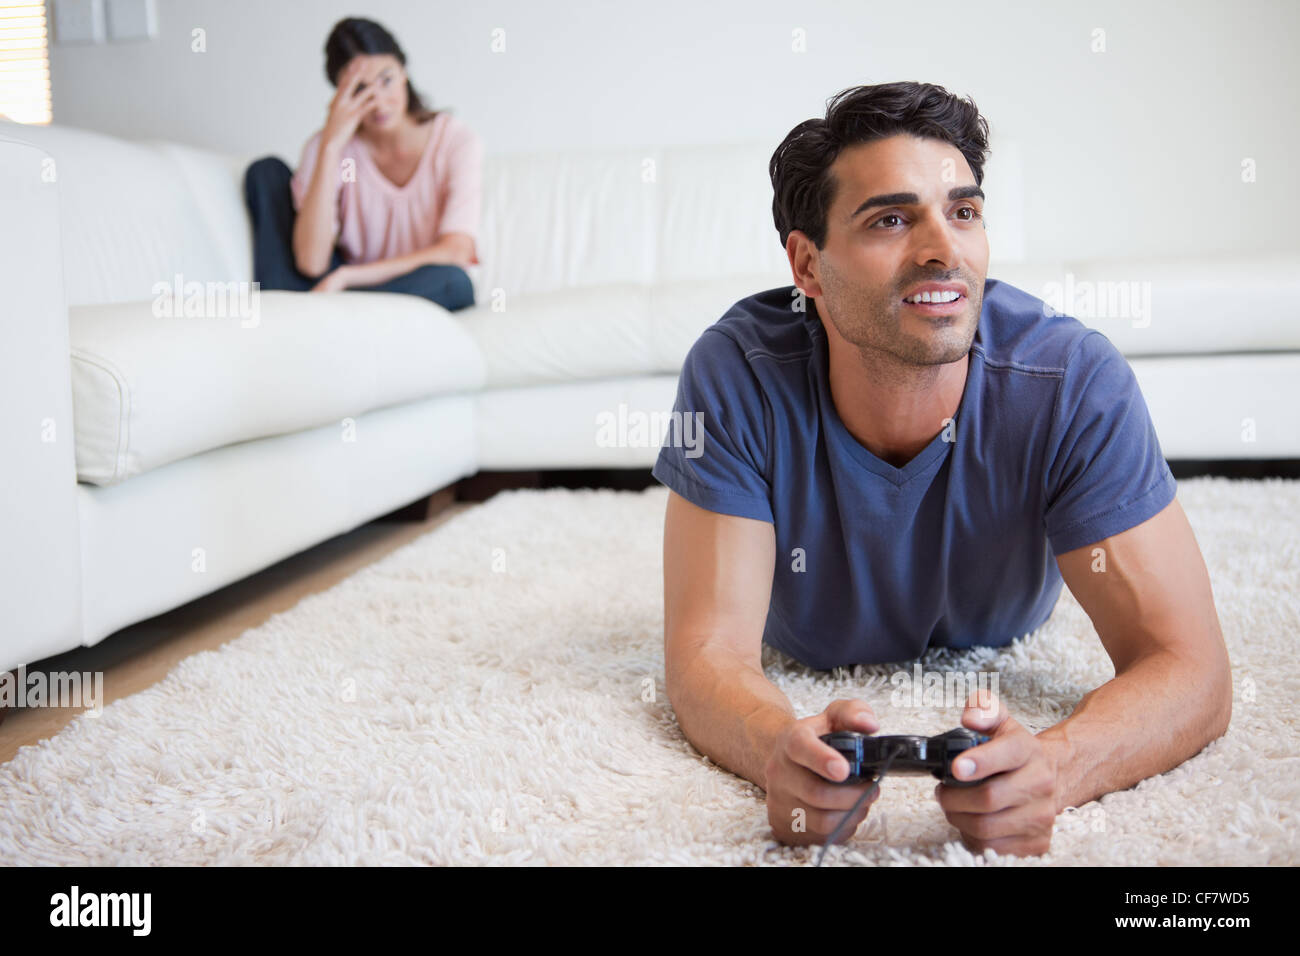 Man beating woman at video games with controller on console over blue  background. Boyfriend celebrating win and girlfriend feeling disappointed  about losing online gameplay in studio Stock Photo - Alamy